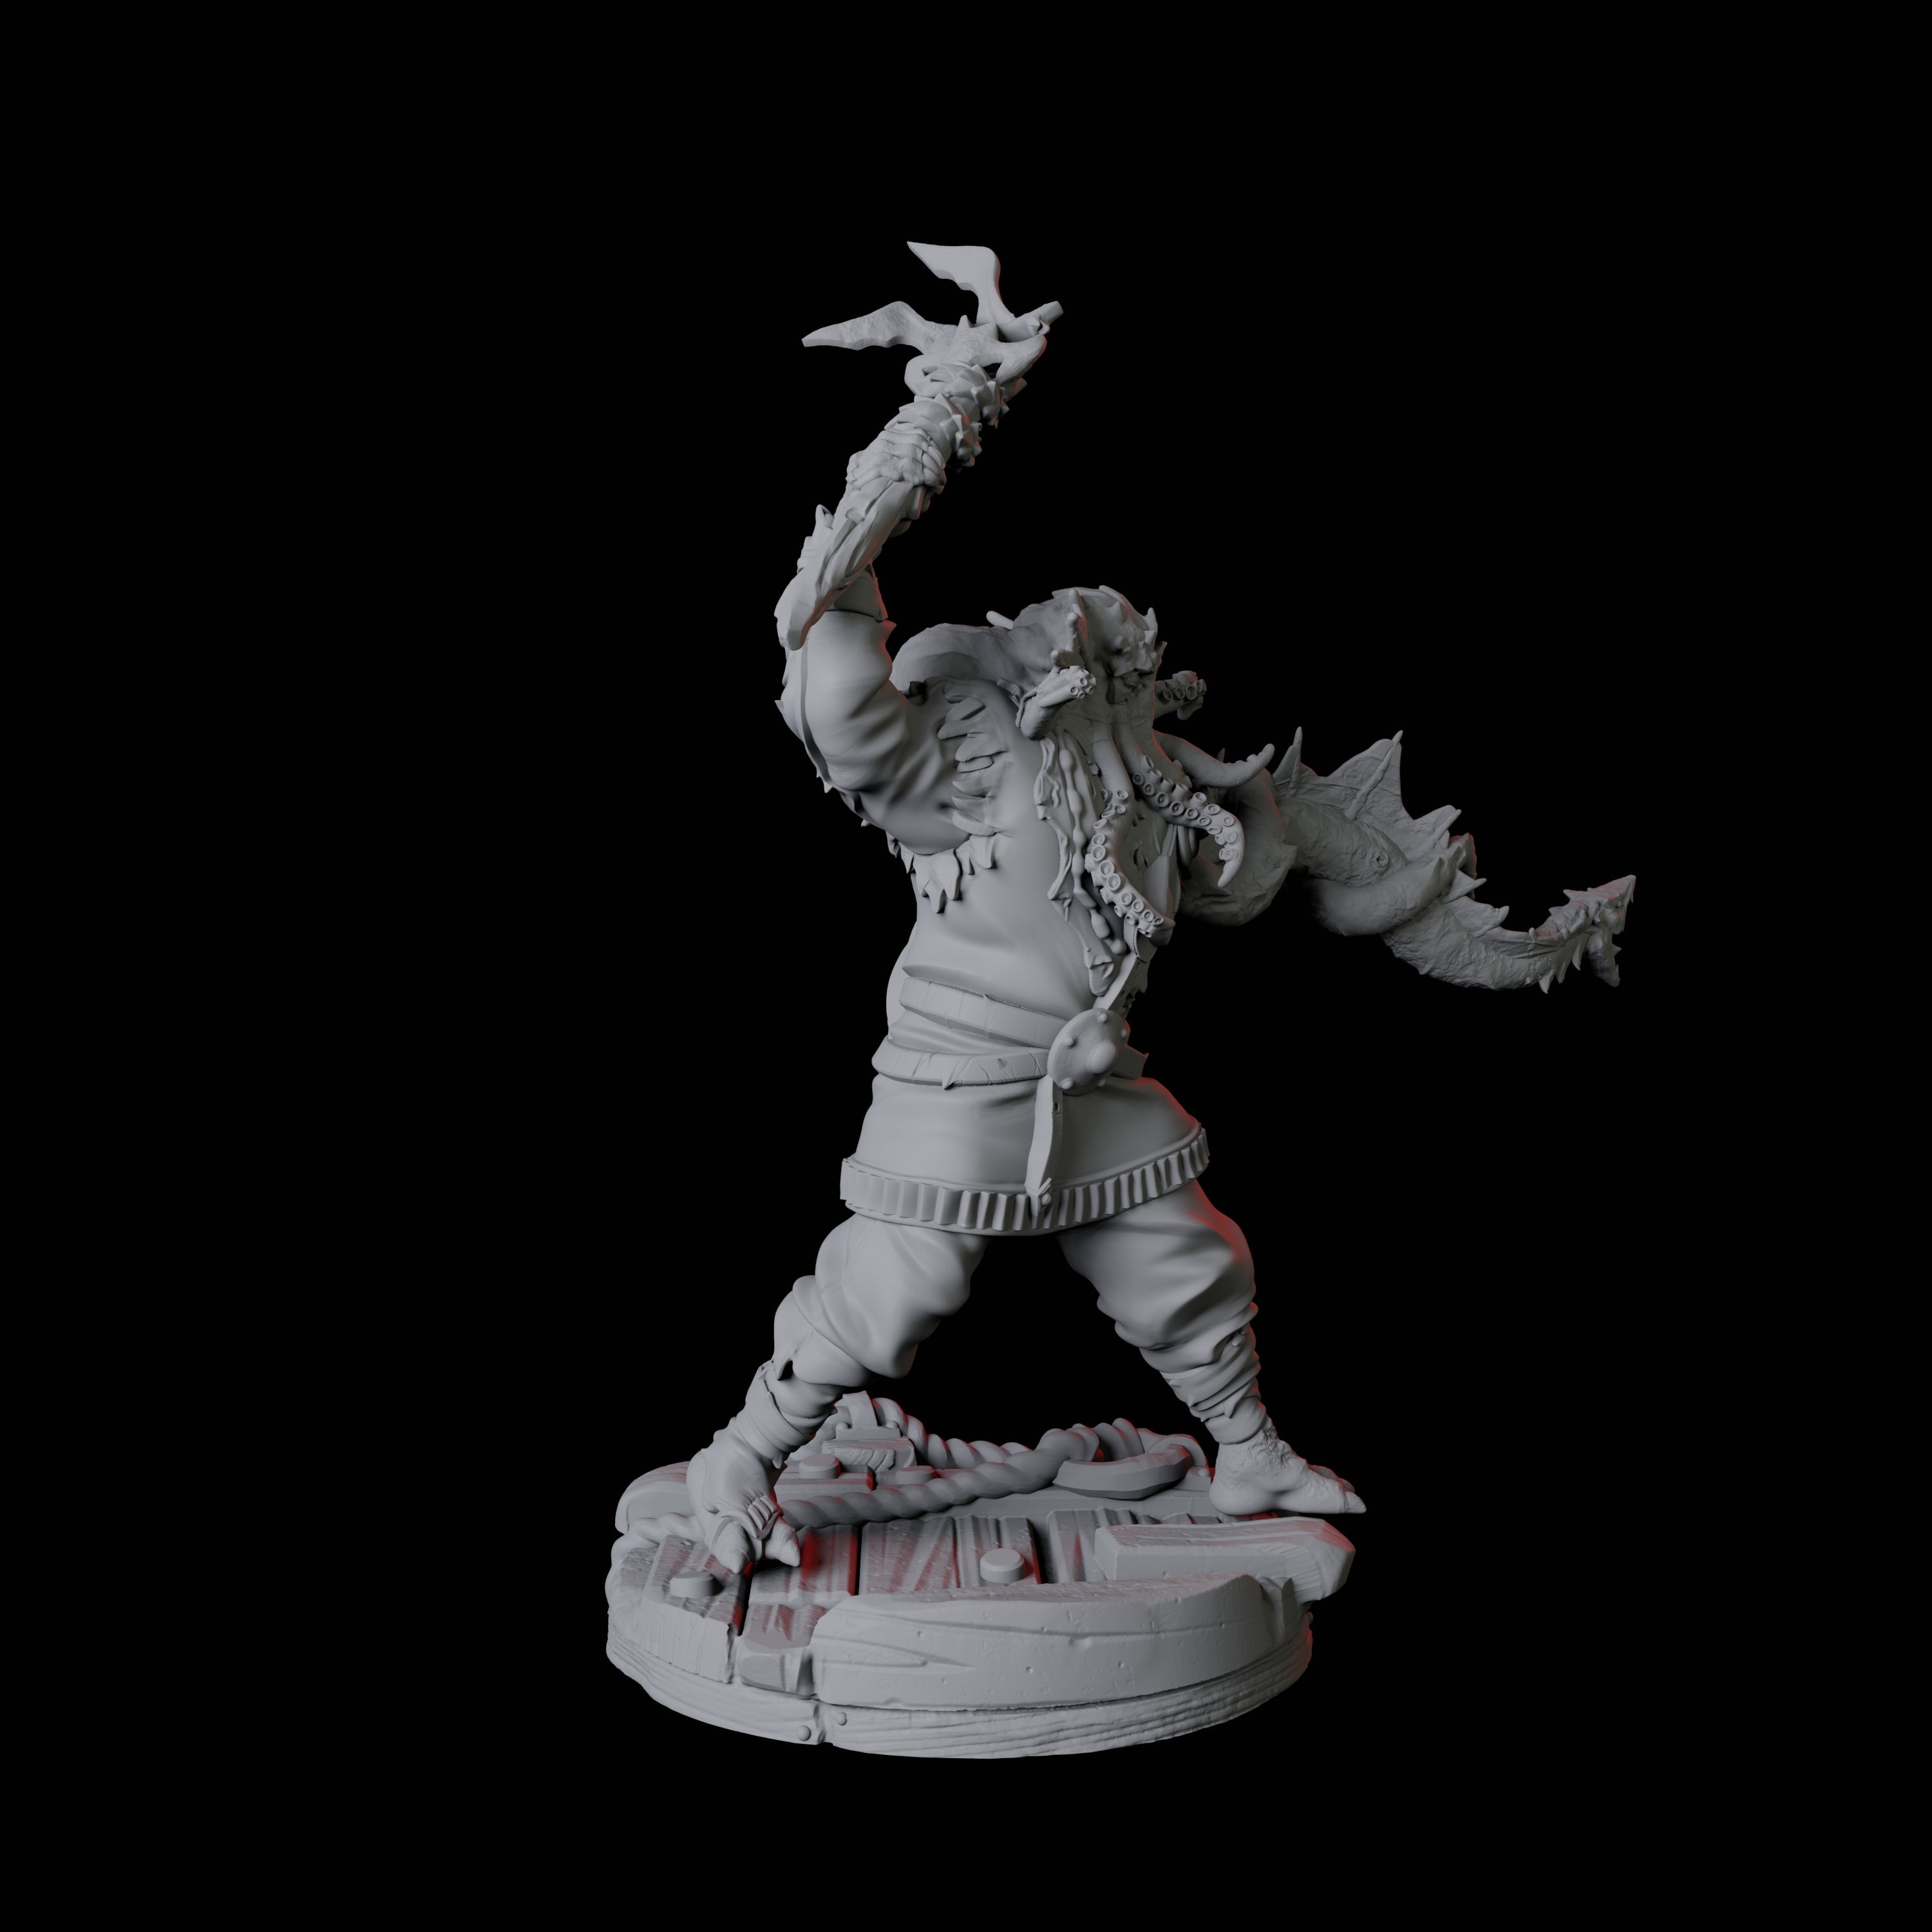 Sky Kraken Acolyte D Miniature for Dungeons and Dragons, Pathfinder or other TTRPGs